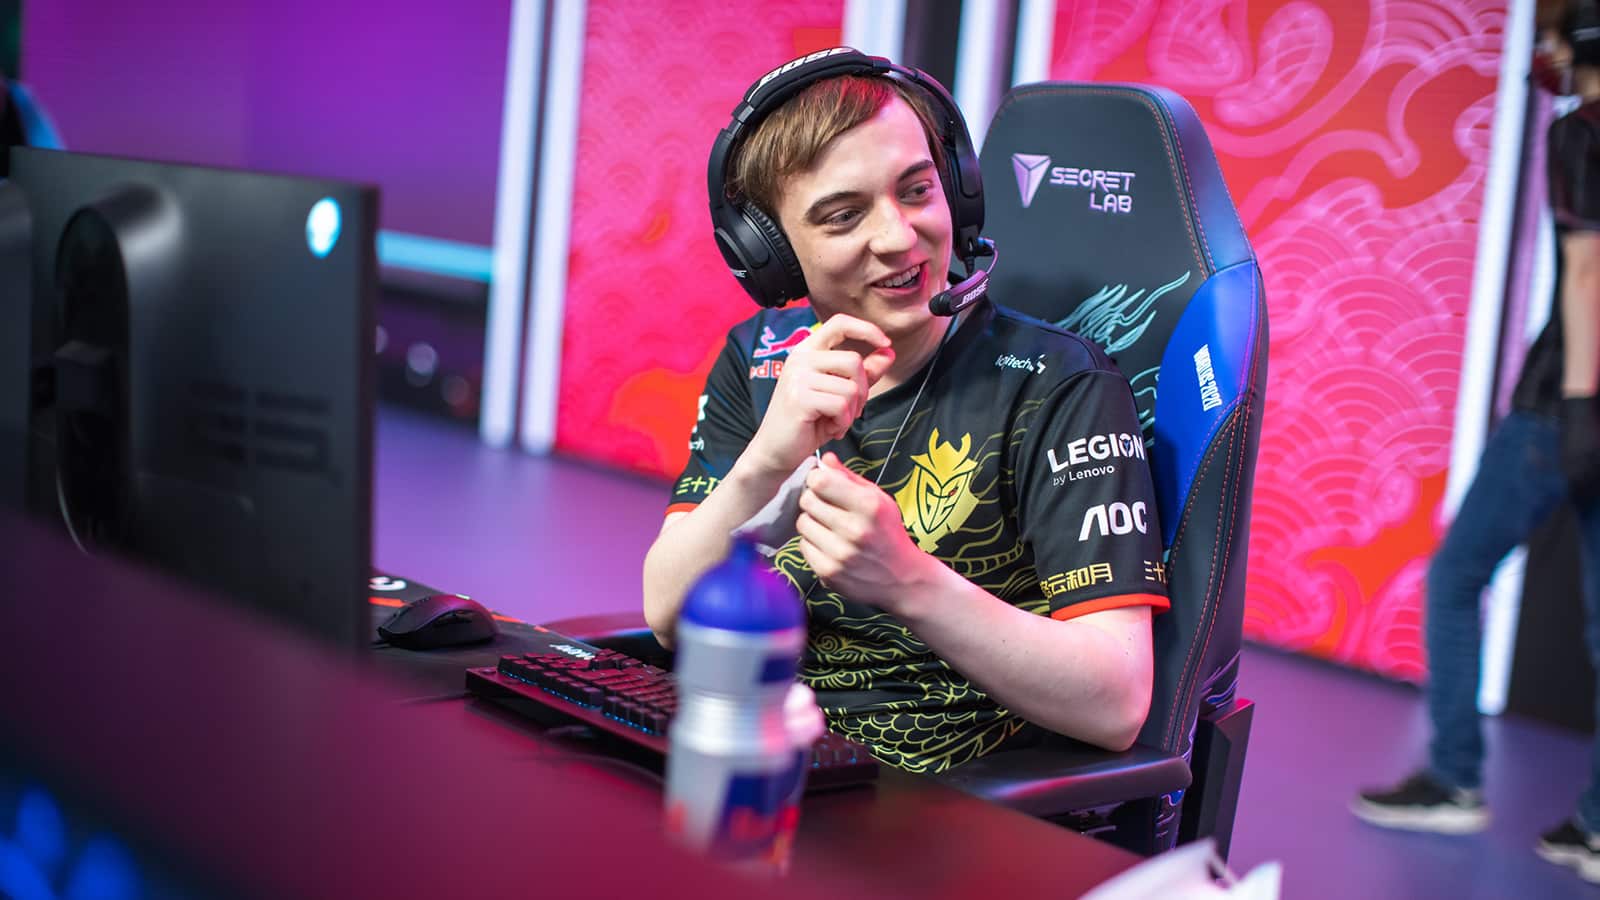 Louis Vuitton partners with League of Legends for 2019 World Championship -  Inven Global